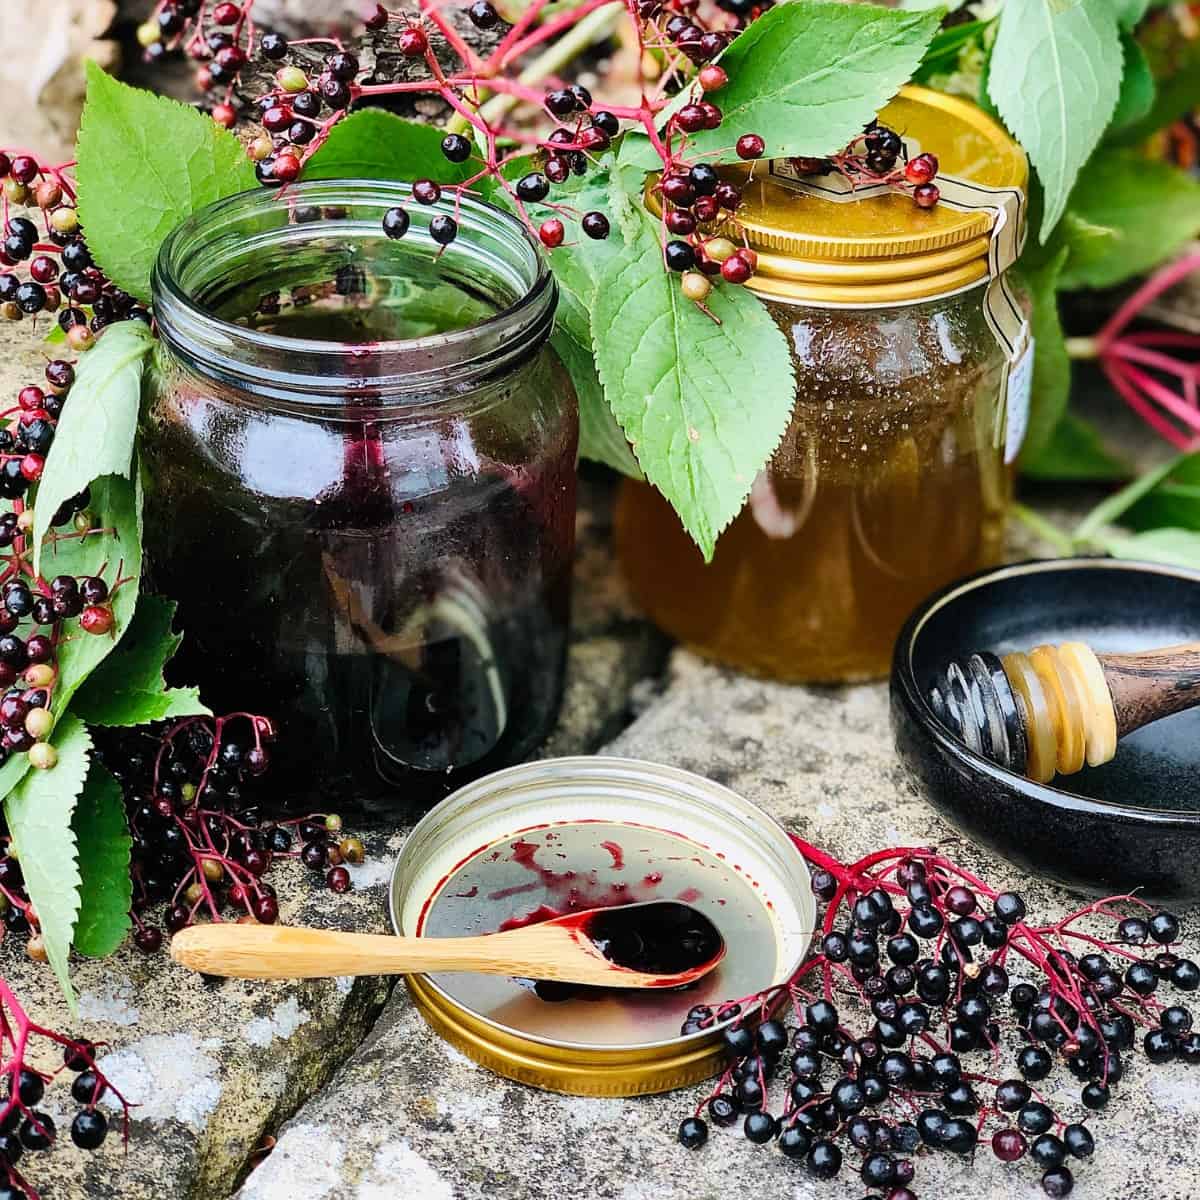 A Jar of elderberry syrup and and a jar of honey. Surrounded by elderberry foliage